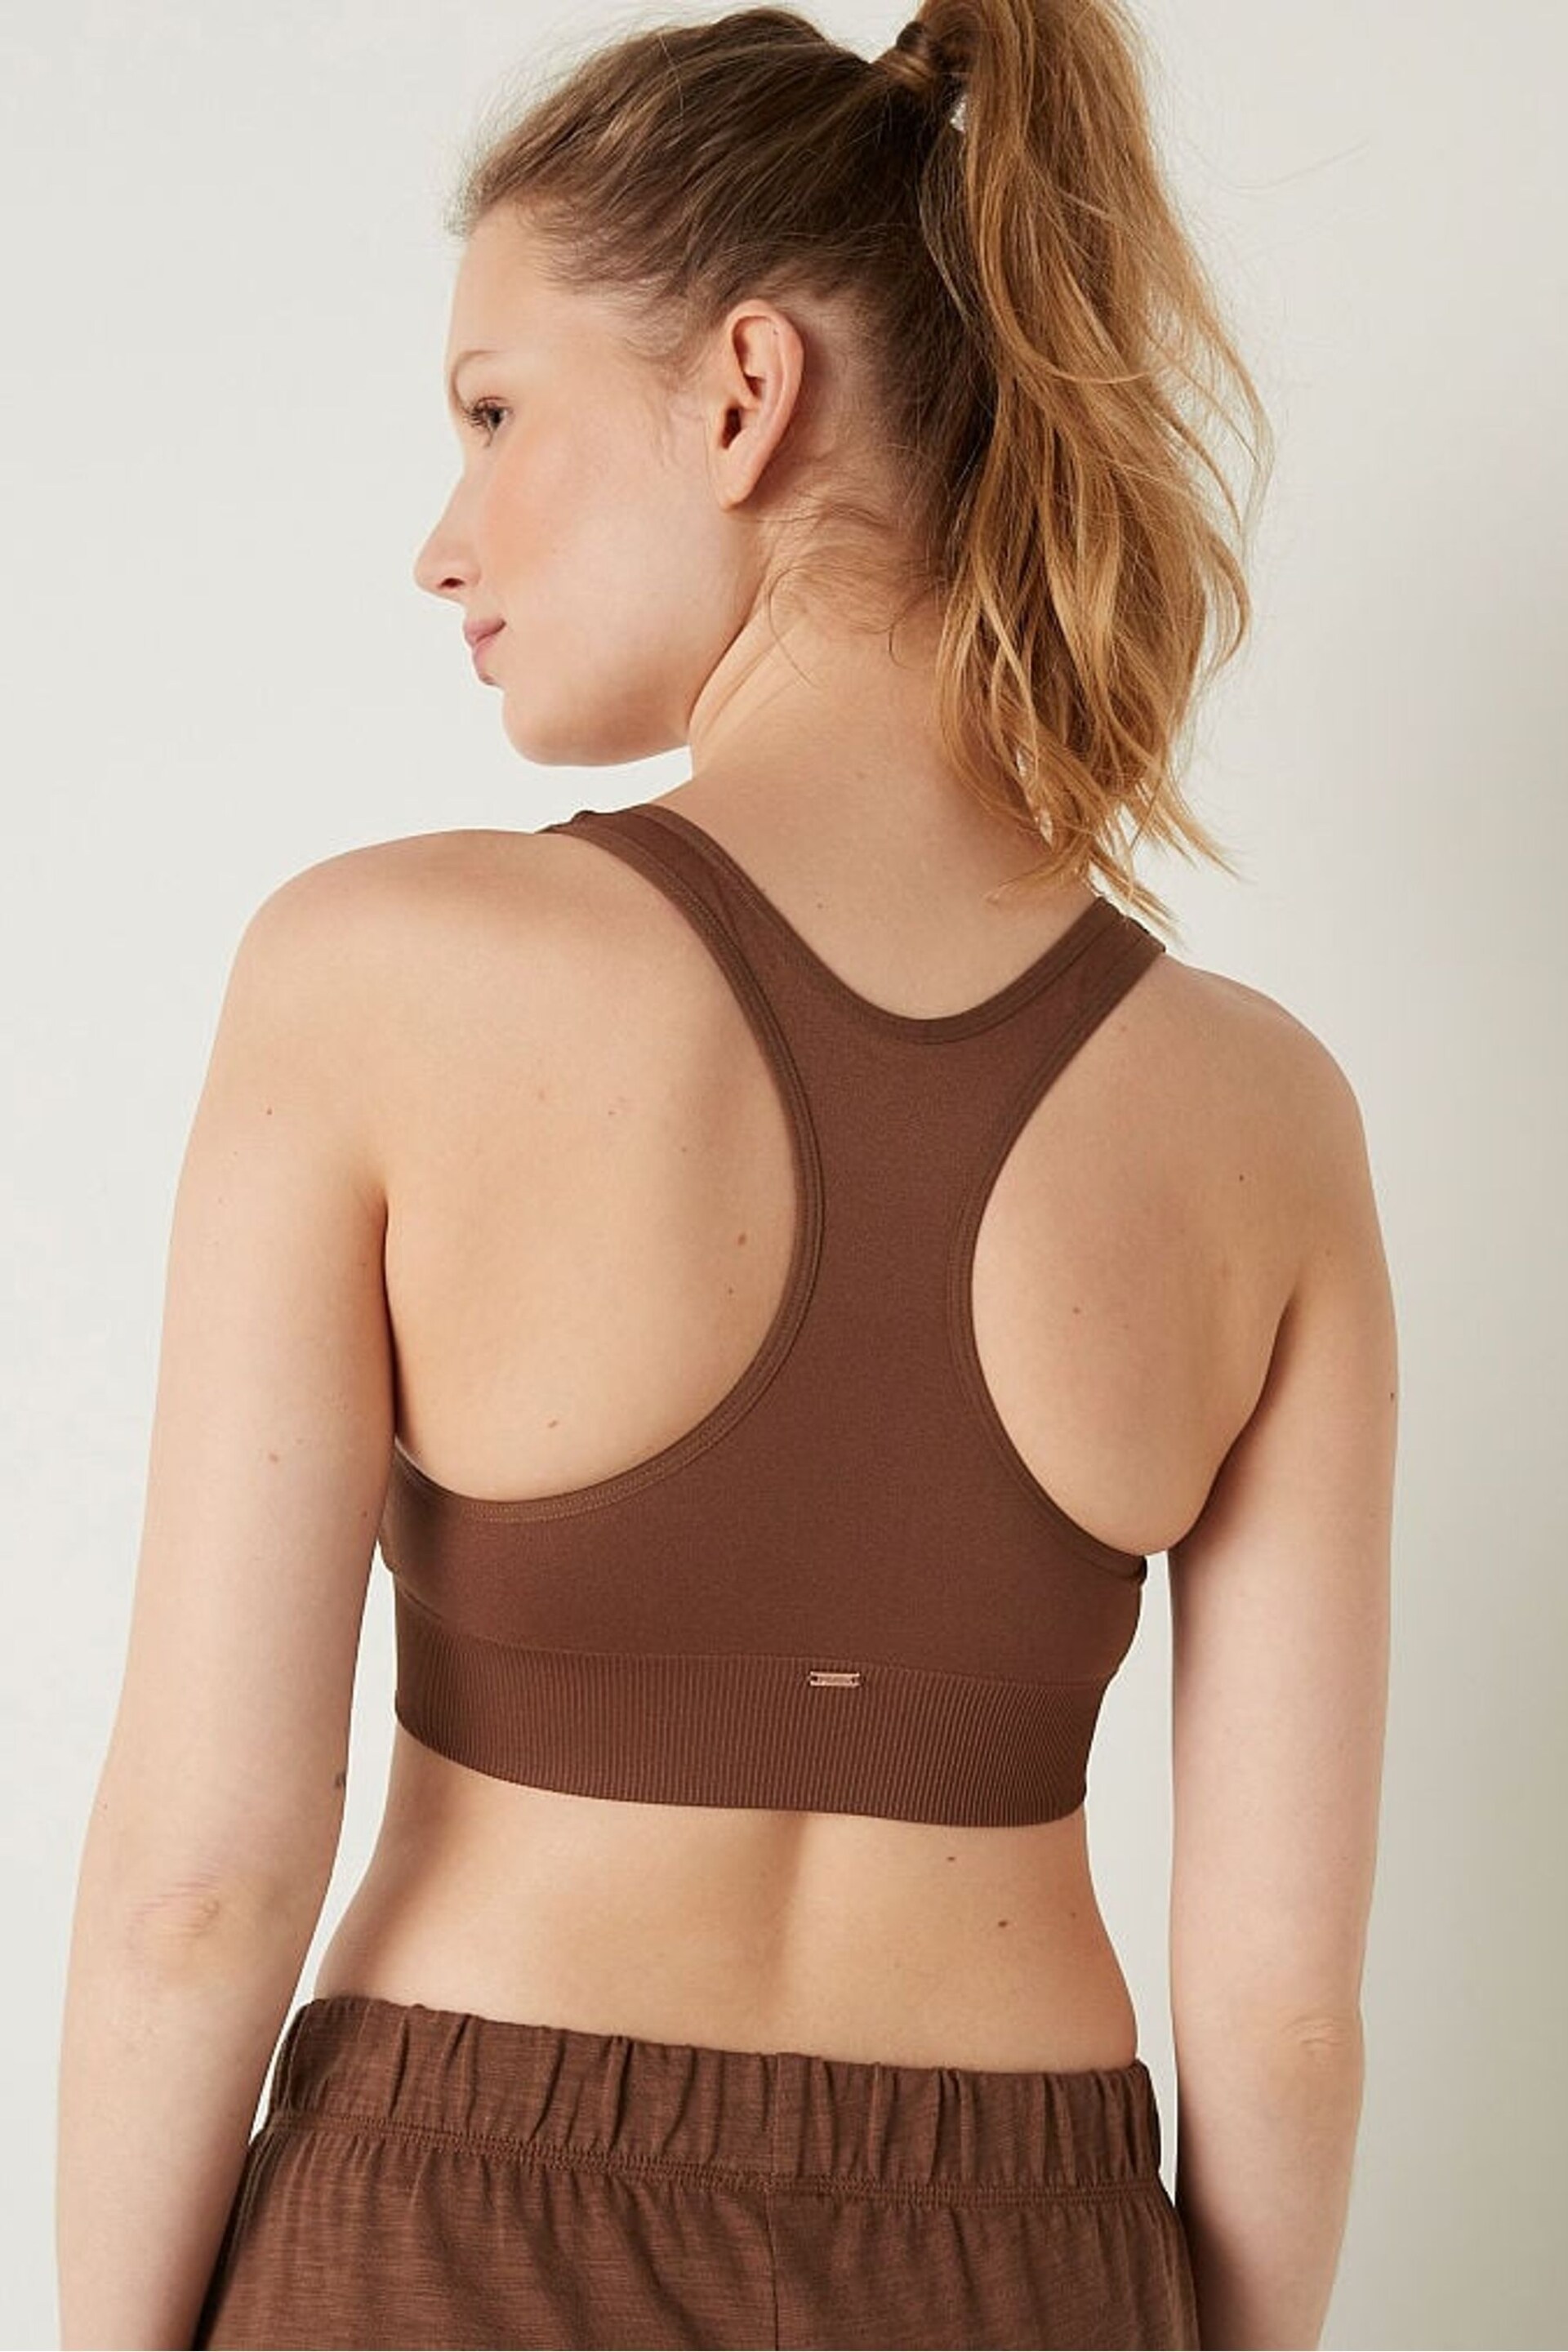 Victoria's Secret PINK Soft Cappuccino Brown Seamless Plunge Bralette - Image 2 of 4